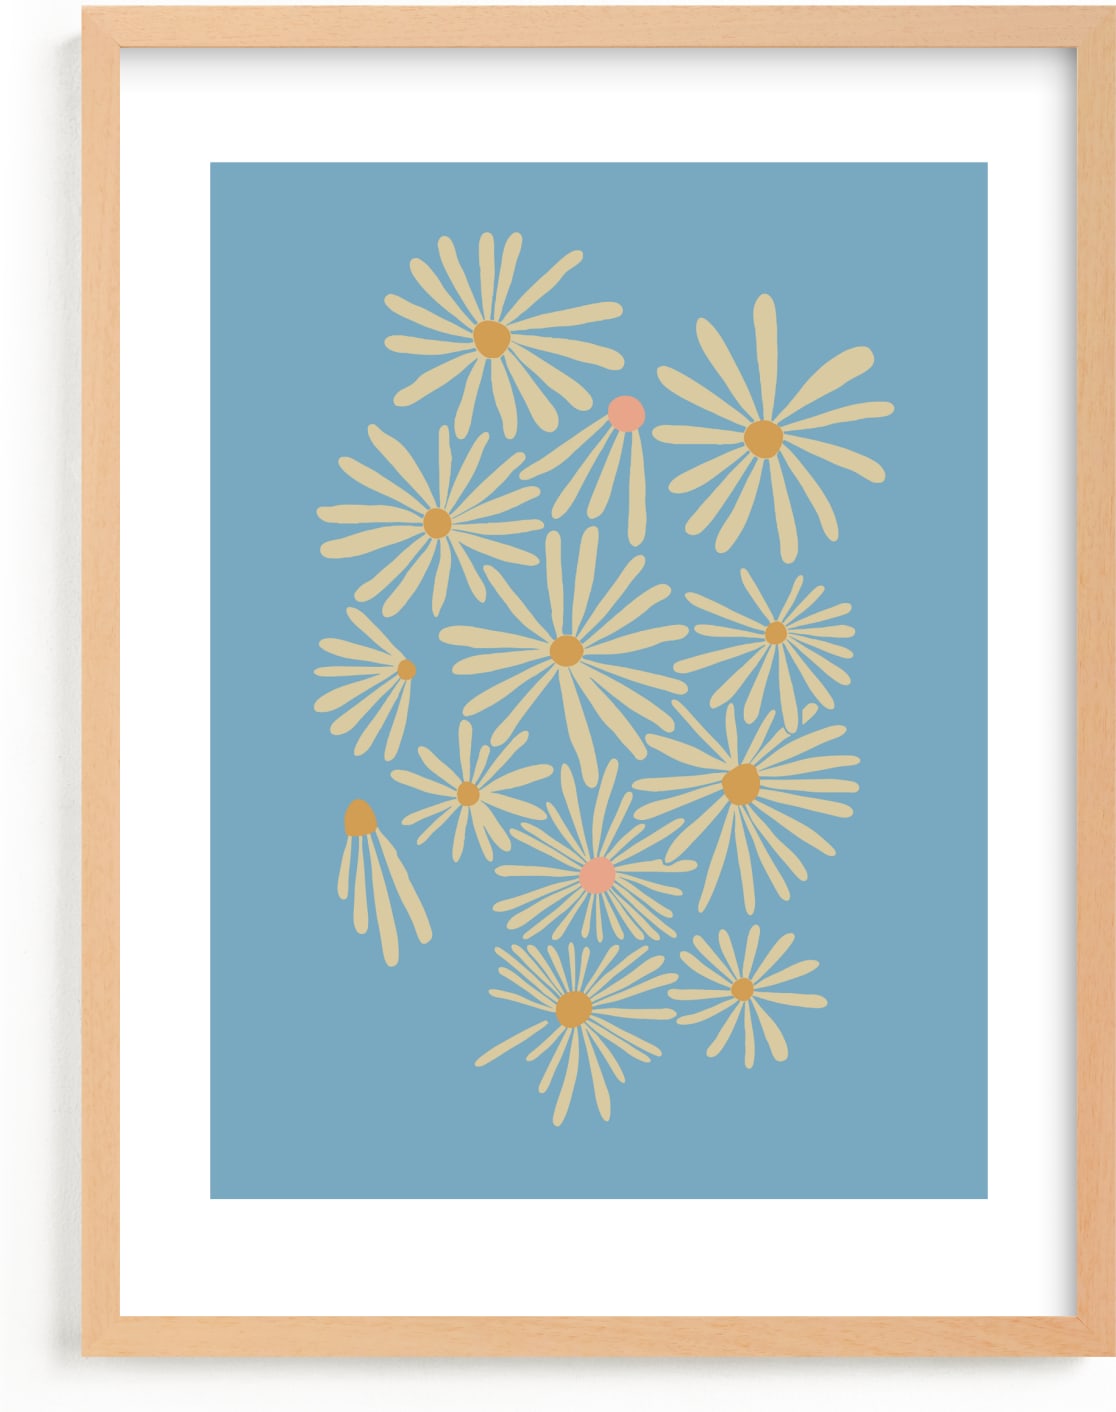 This is a blue kids wall art by Kate Capone called Vintage Floral Set II.